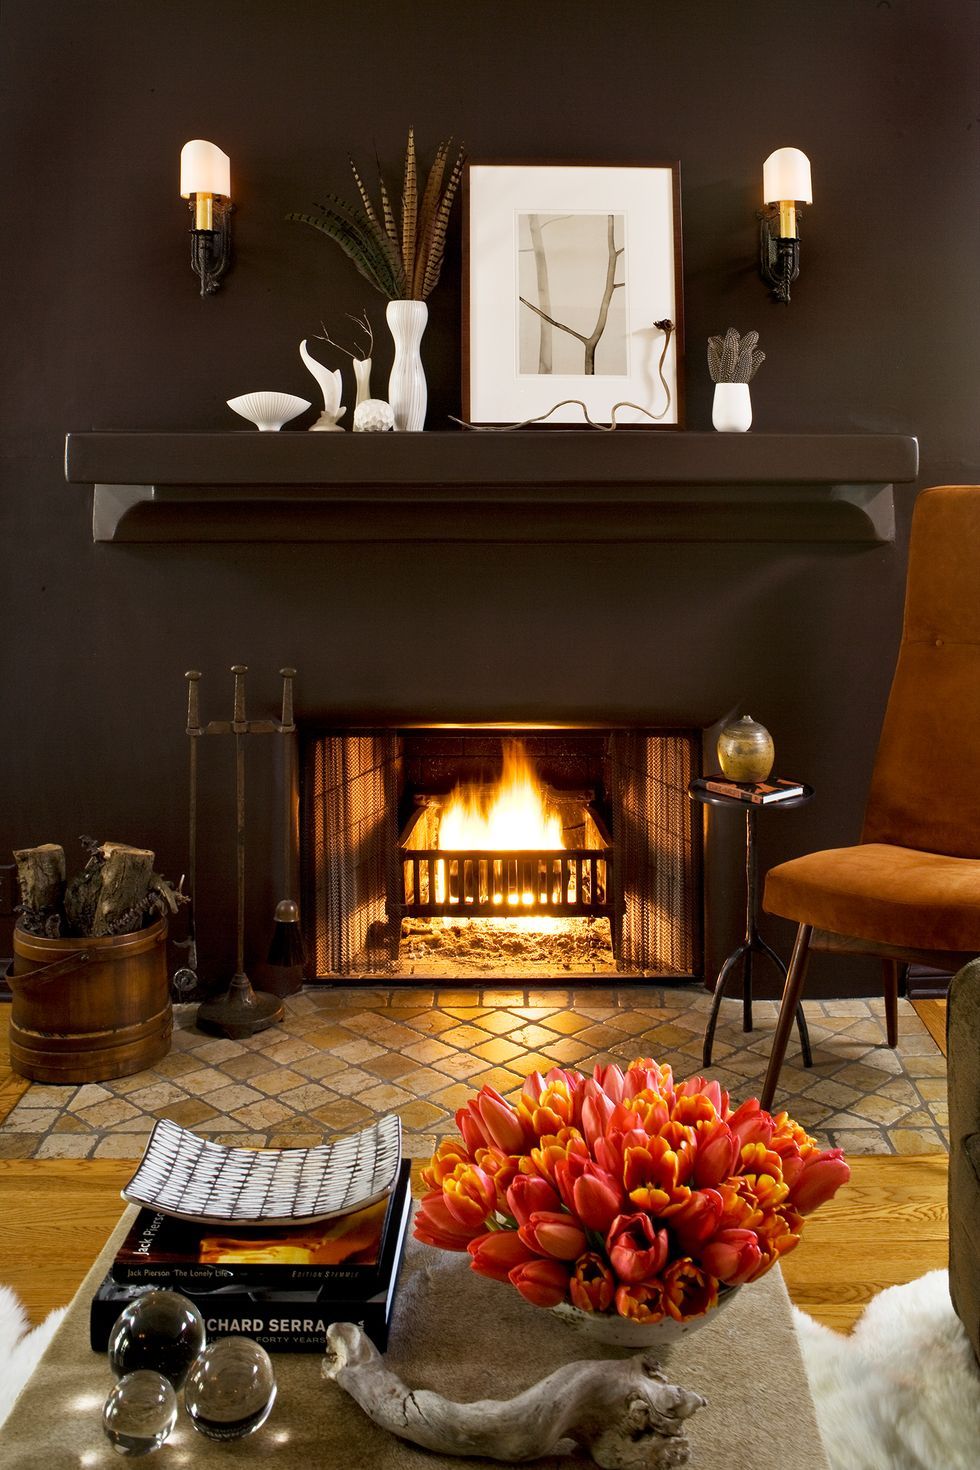 Earth Tone Decorating Ideas How To